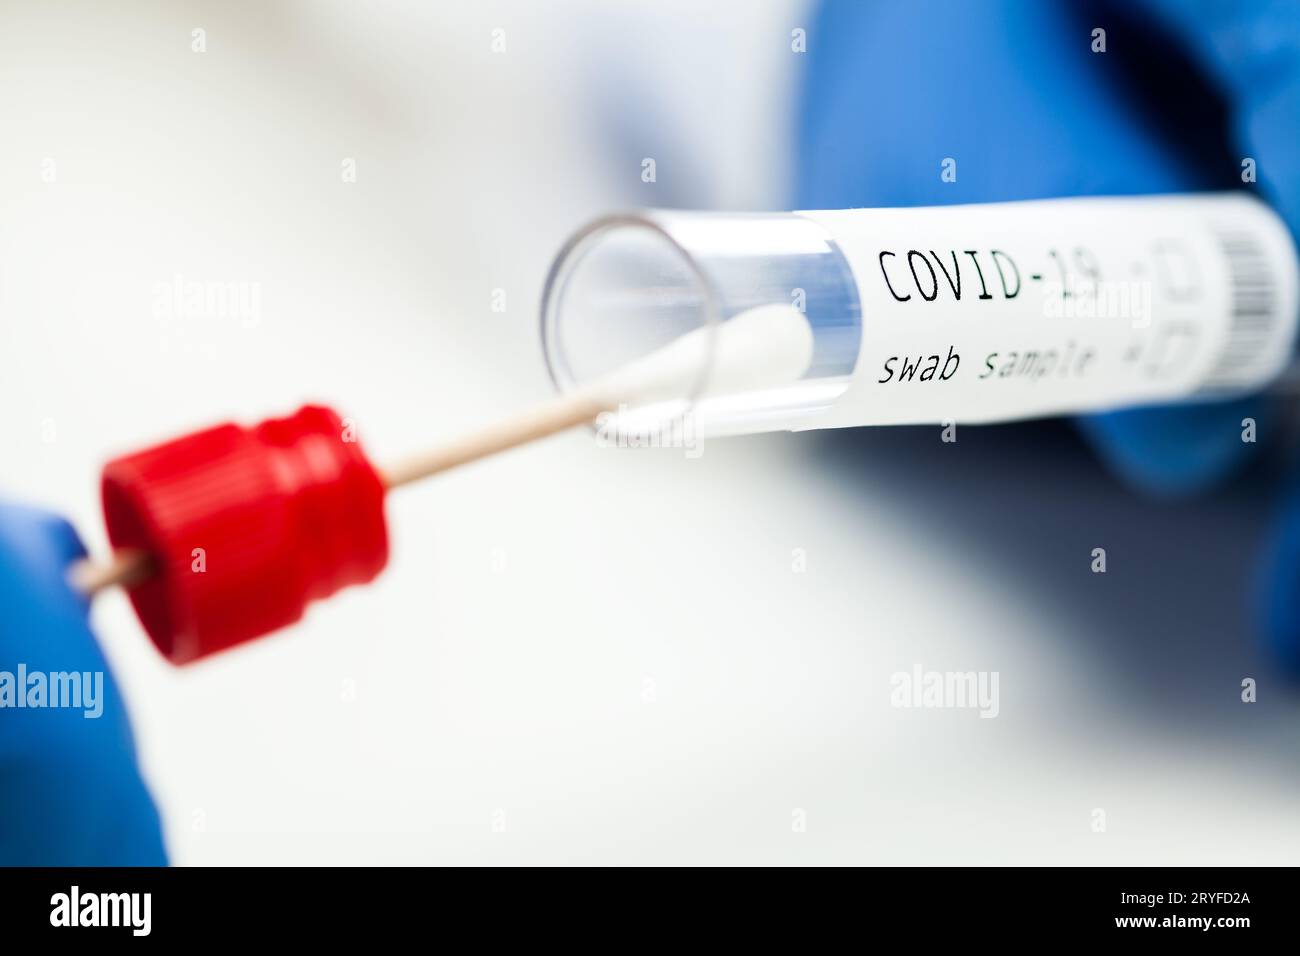 Close up of COVID-19 PCR testing collection kit Stock Photo